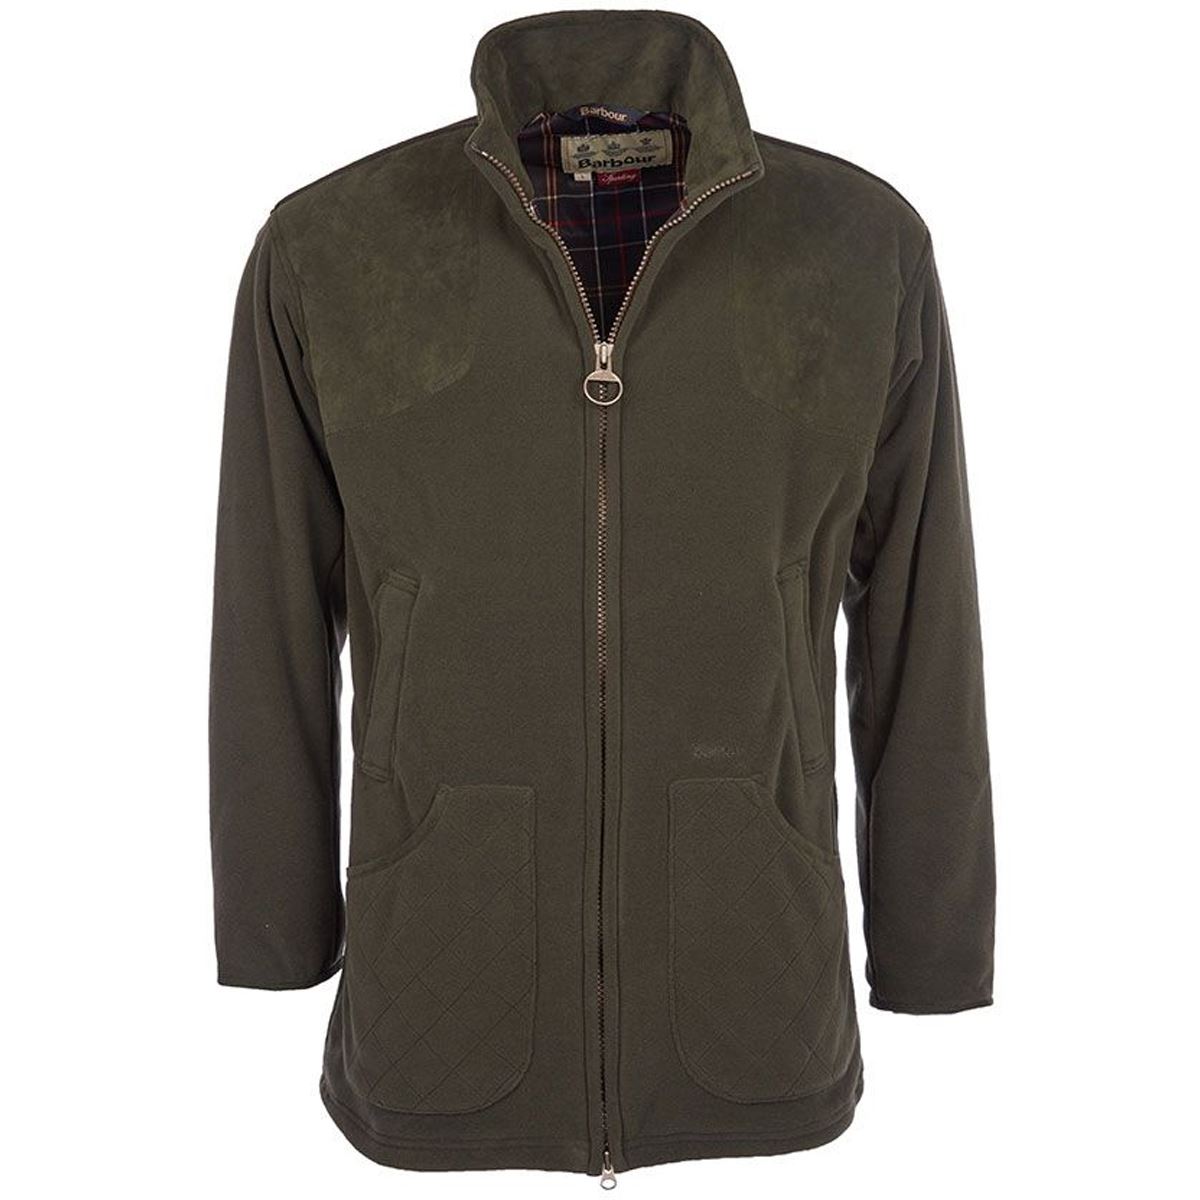 What sizes & colors does the Barbour Dunmoor Fleece Jacket come in?